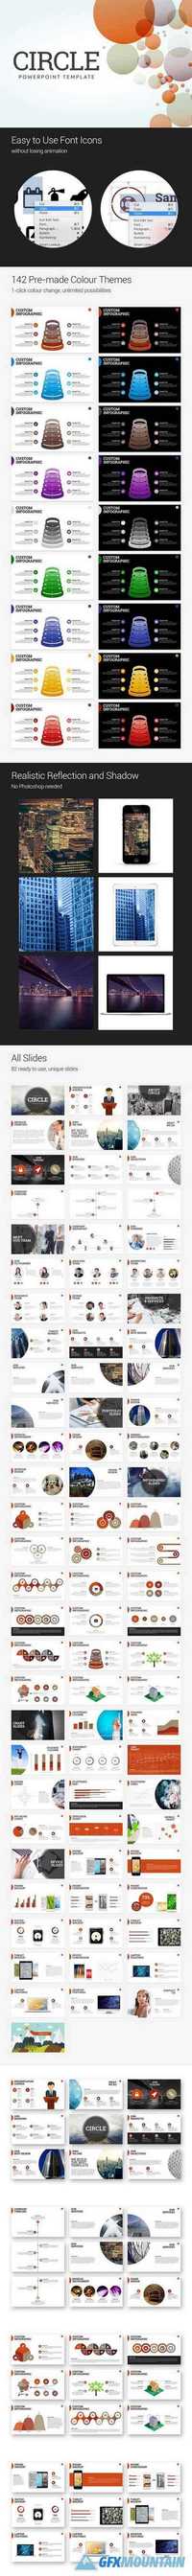 Circle- PowerPoint Template 704019